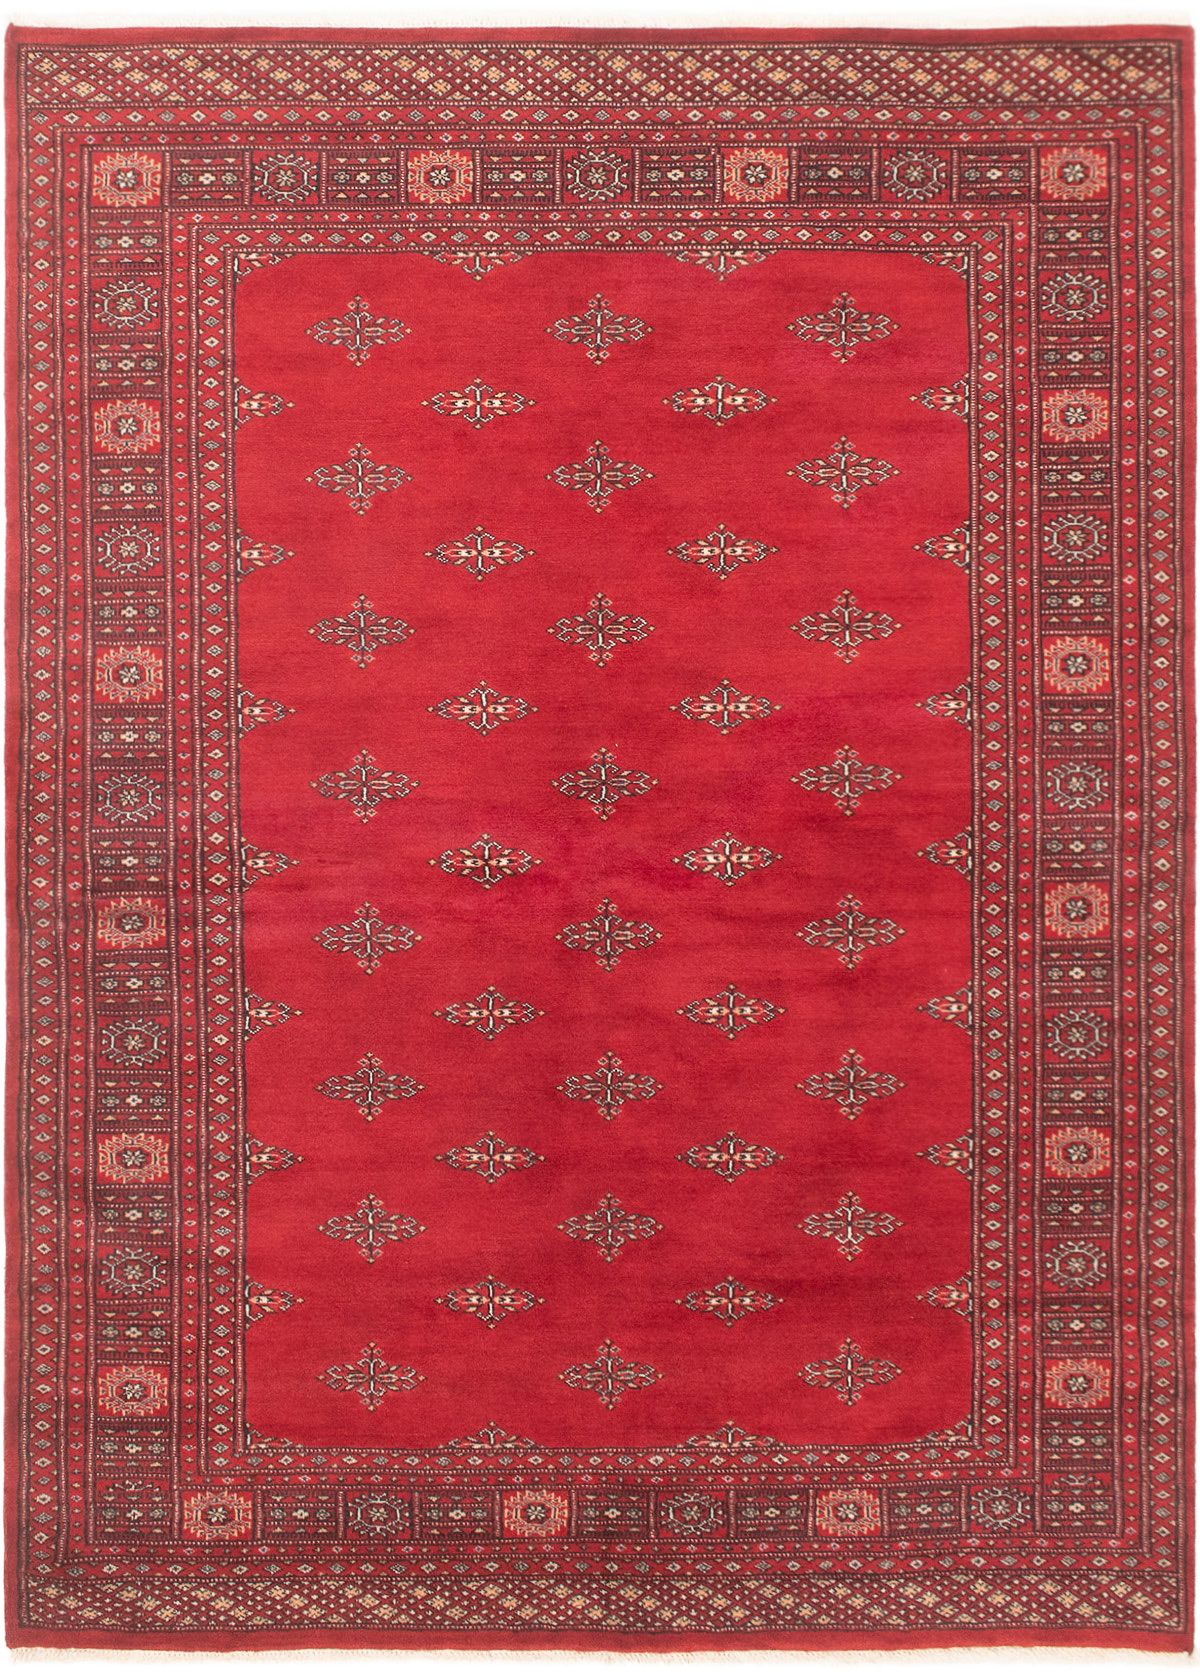 Hand-knotted Finest Peshawar Bokhara Red Wool Rug 5'8" x 7'9"  Size: 5'8" x 7'9"  